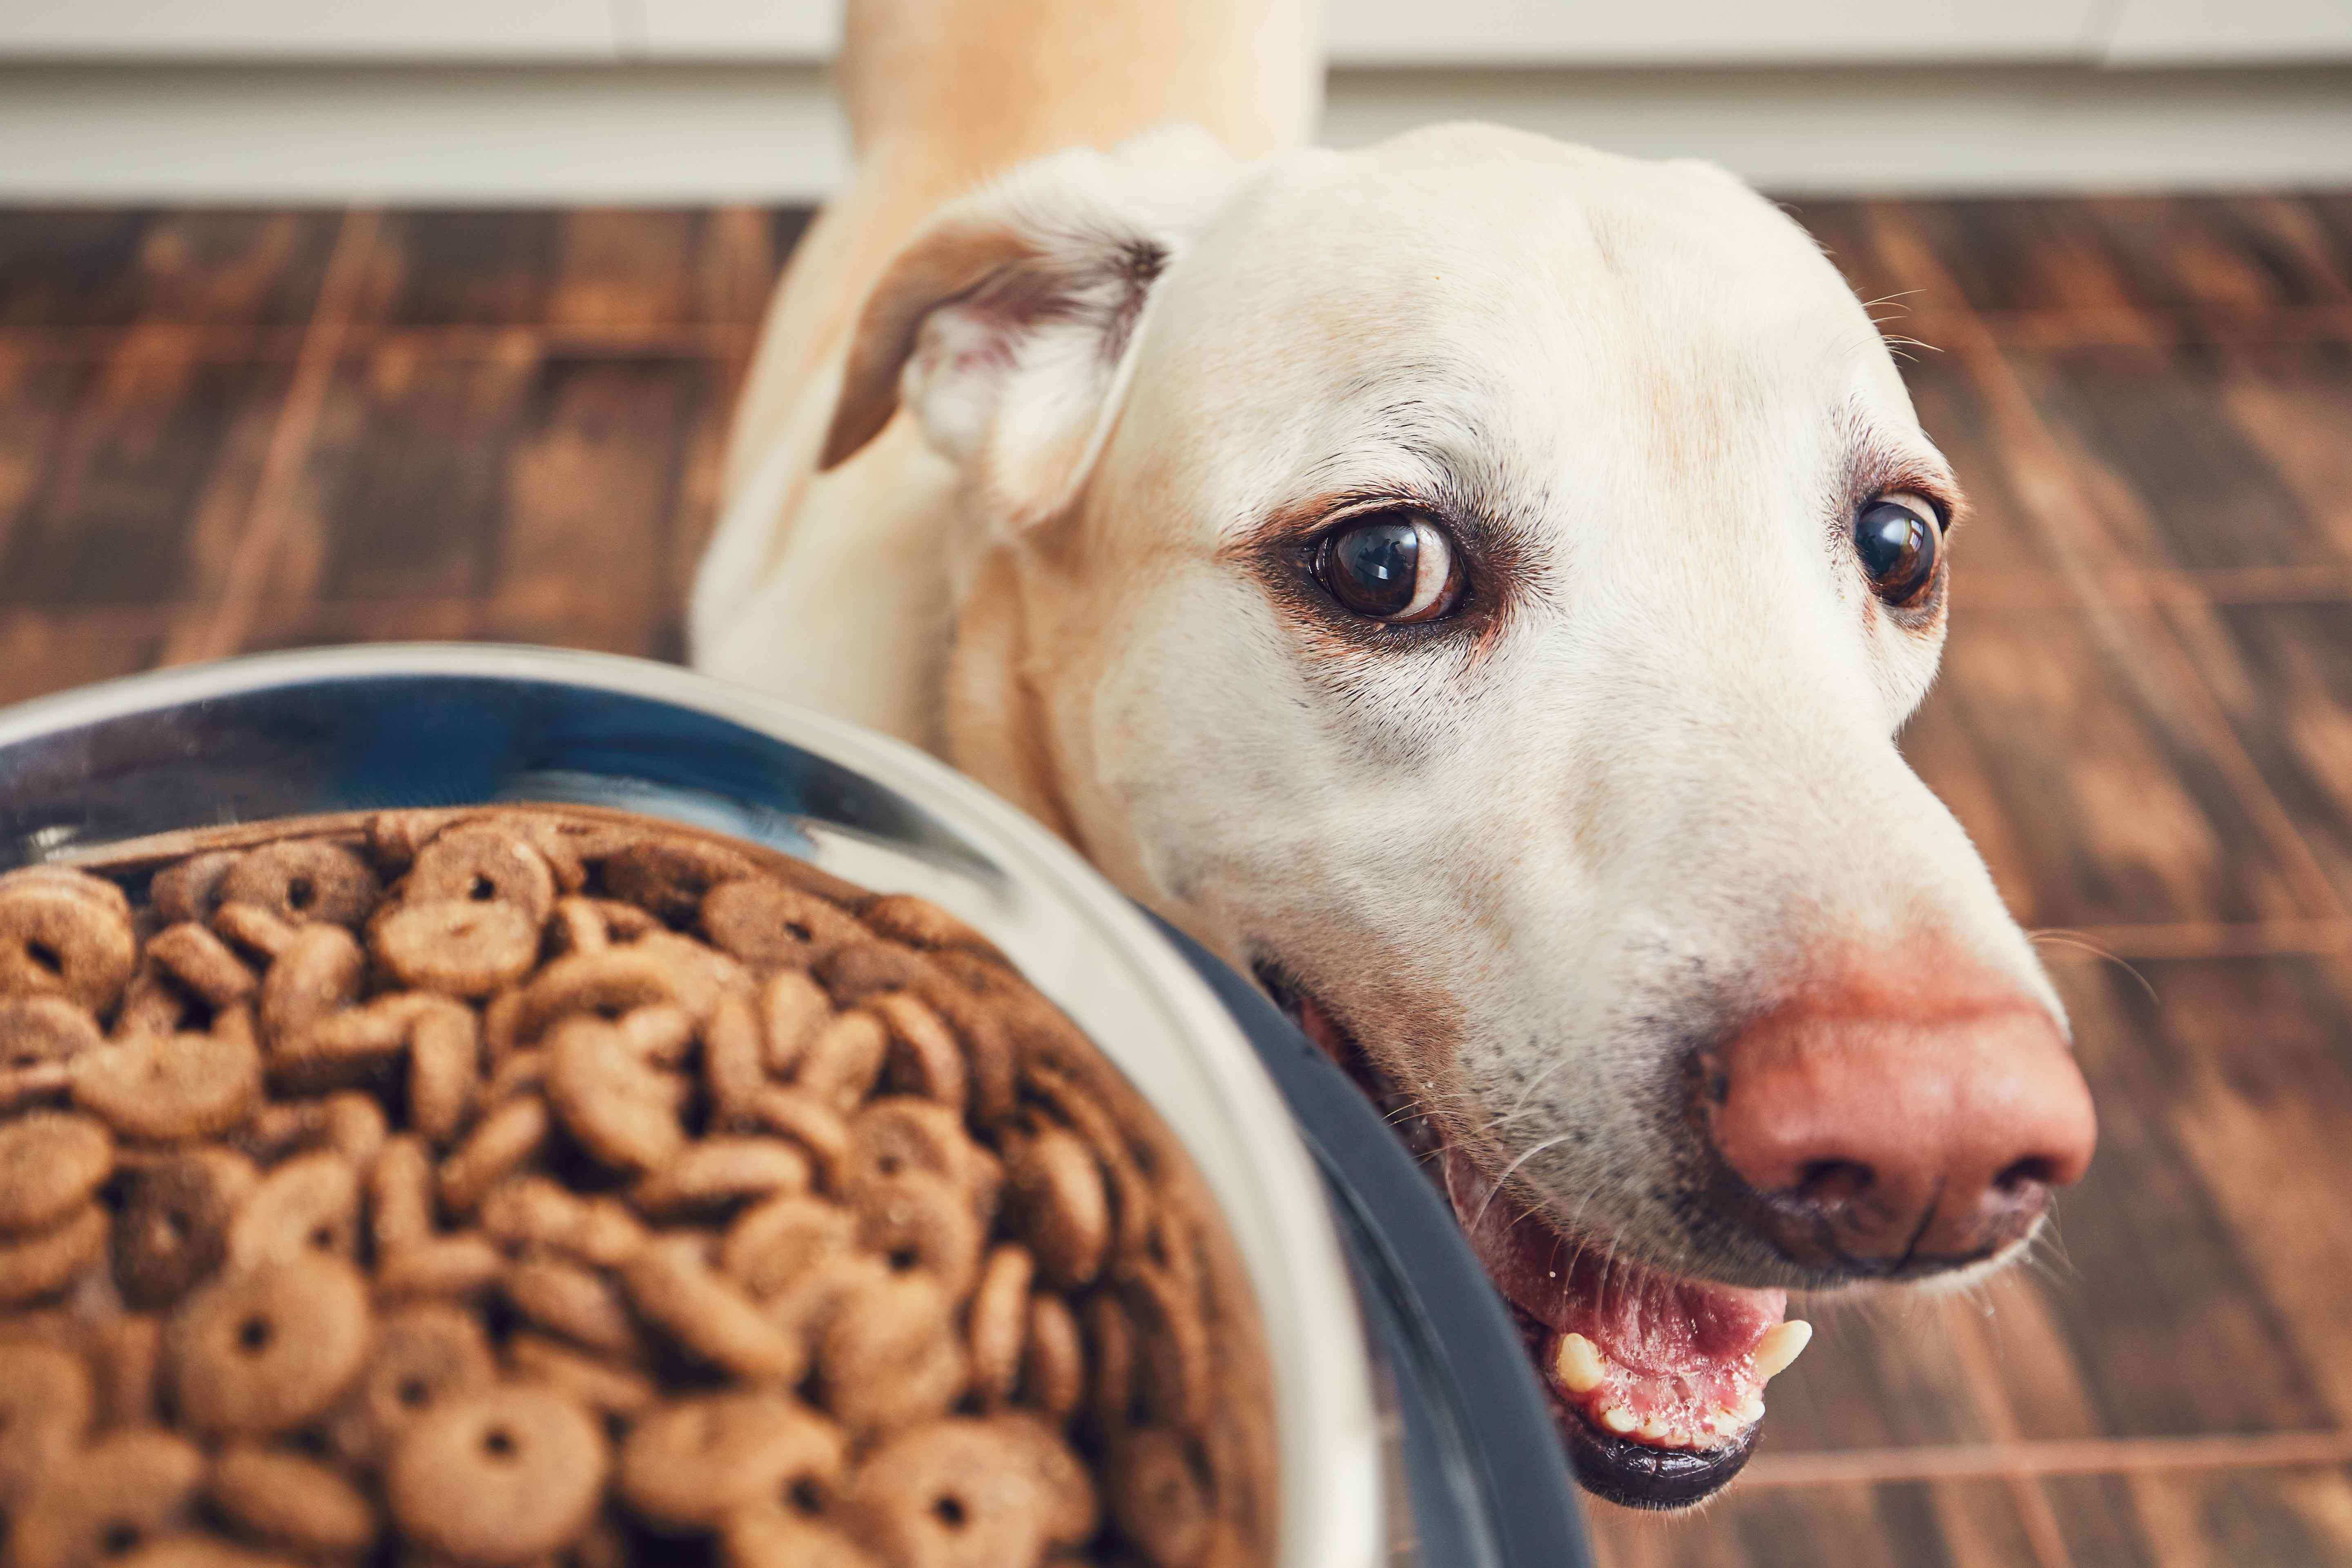 Genetics Markers Prove Dogs Have Evolved To Digest Carbohydrates And Starches